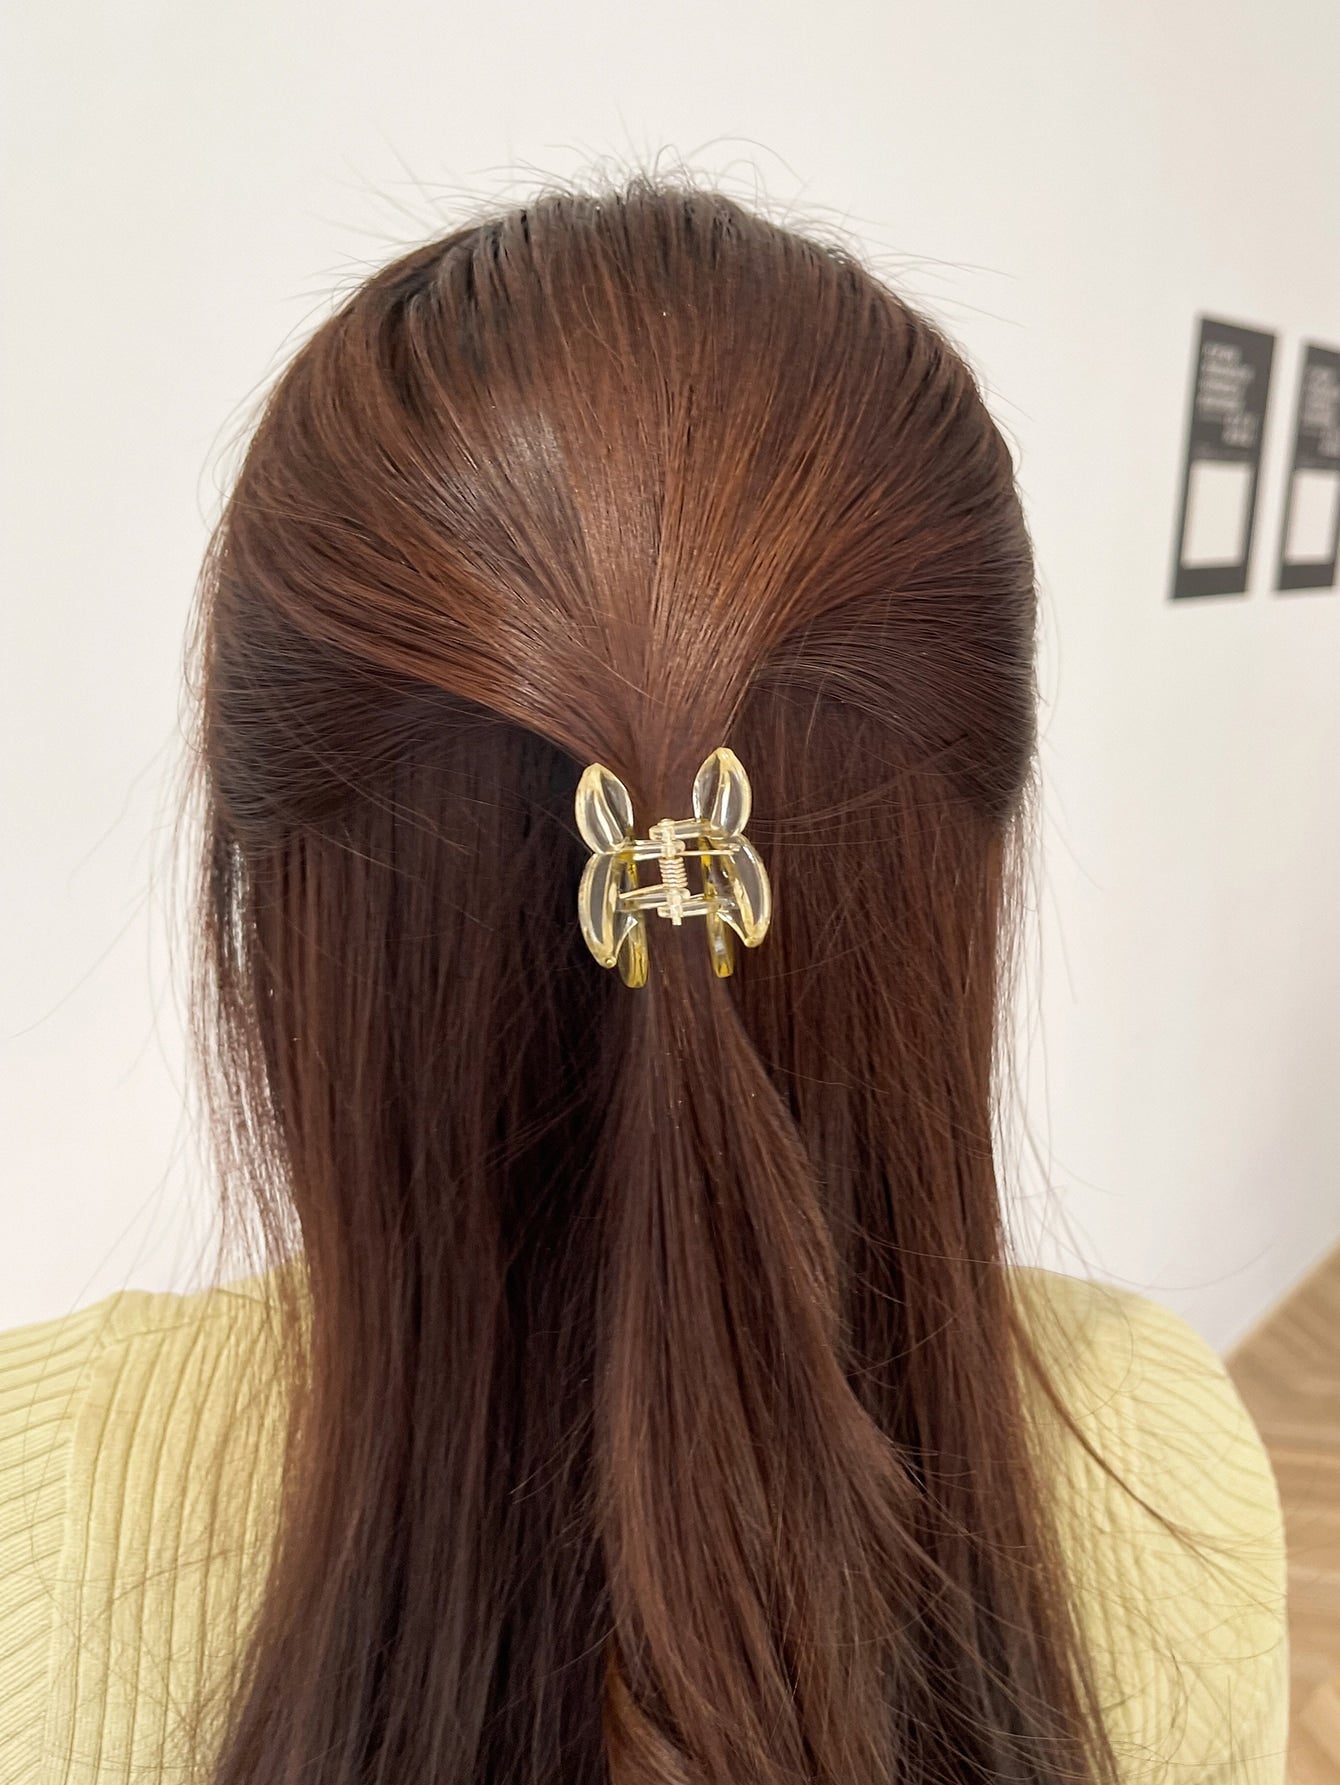 Fruit Design Hair Claw For Daily Use For Girls Hairstyles Casual Street